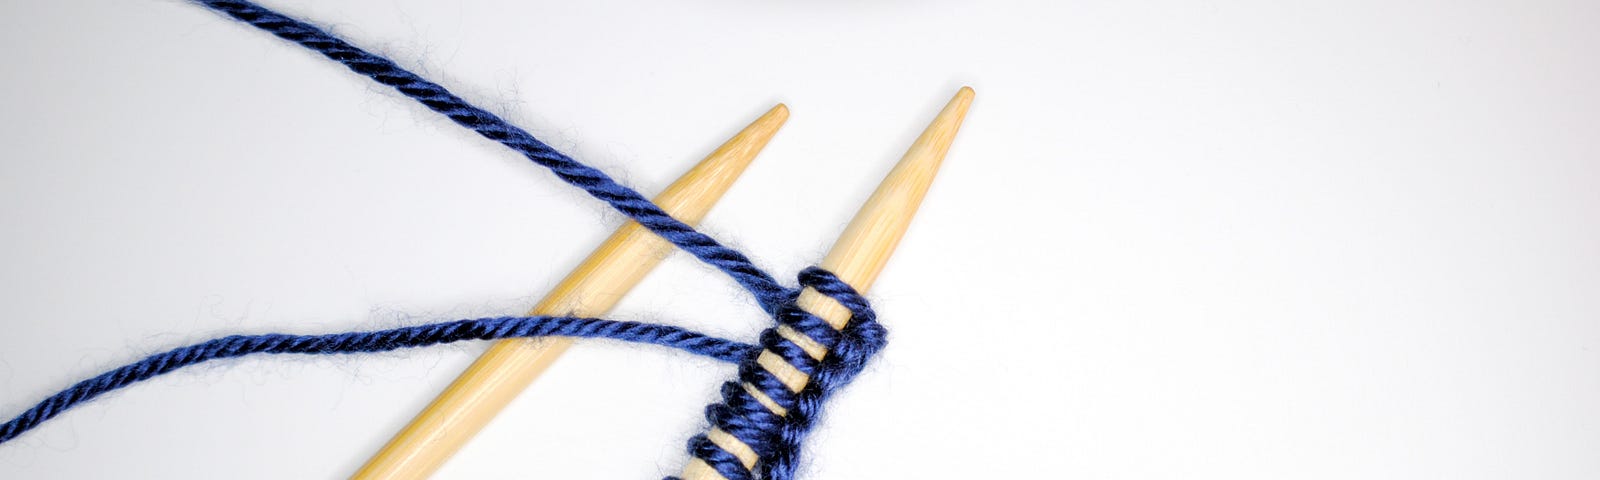 Two yellow knitting needles with several blue stitches cast onto them sit on a white background. A blue ball of wool is nearby.